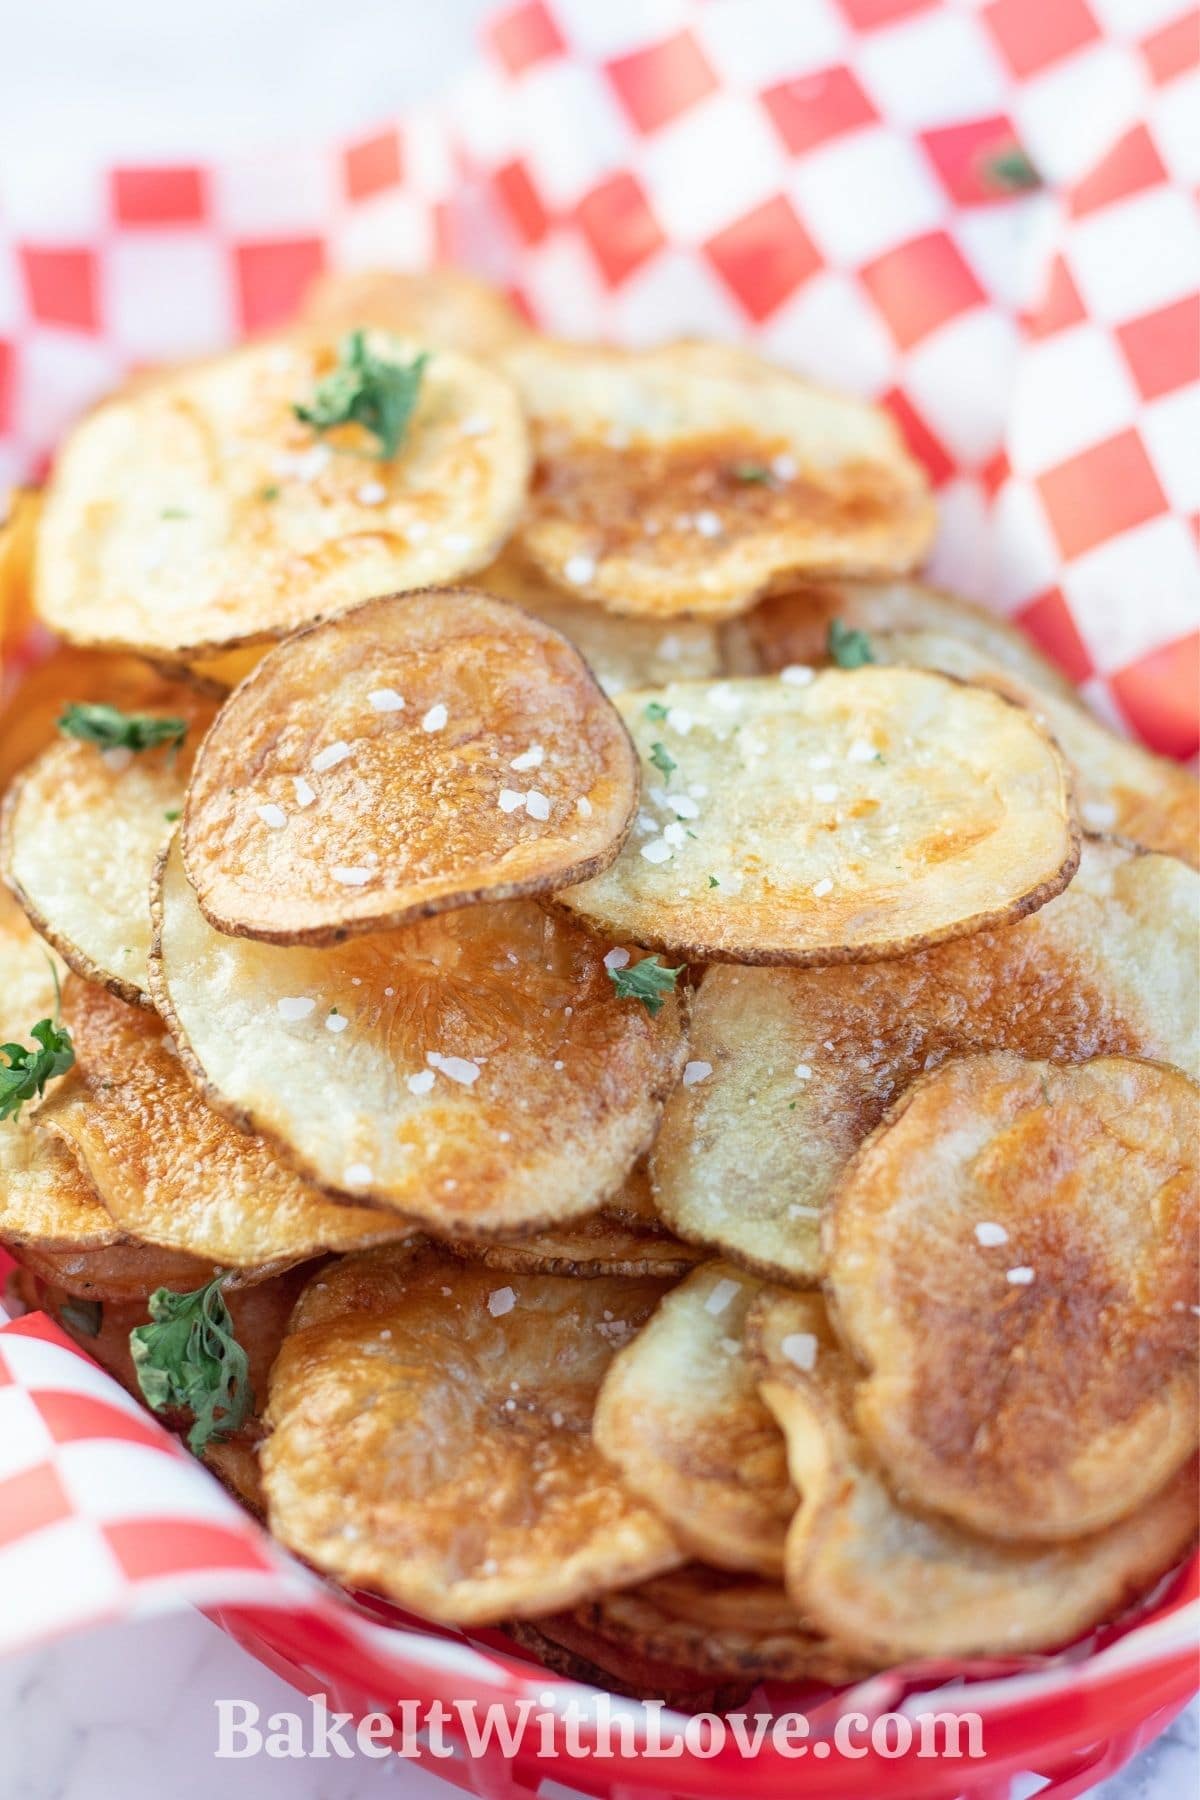 Piled air fryer potato chips in a picnic basket.